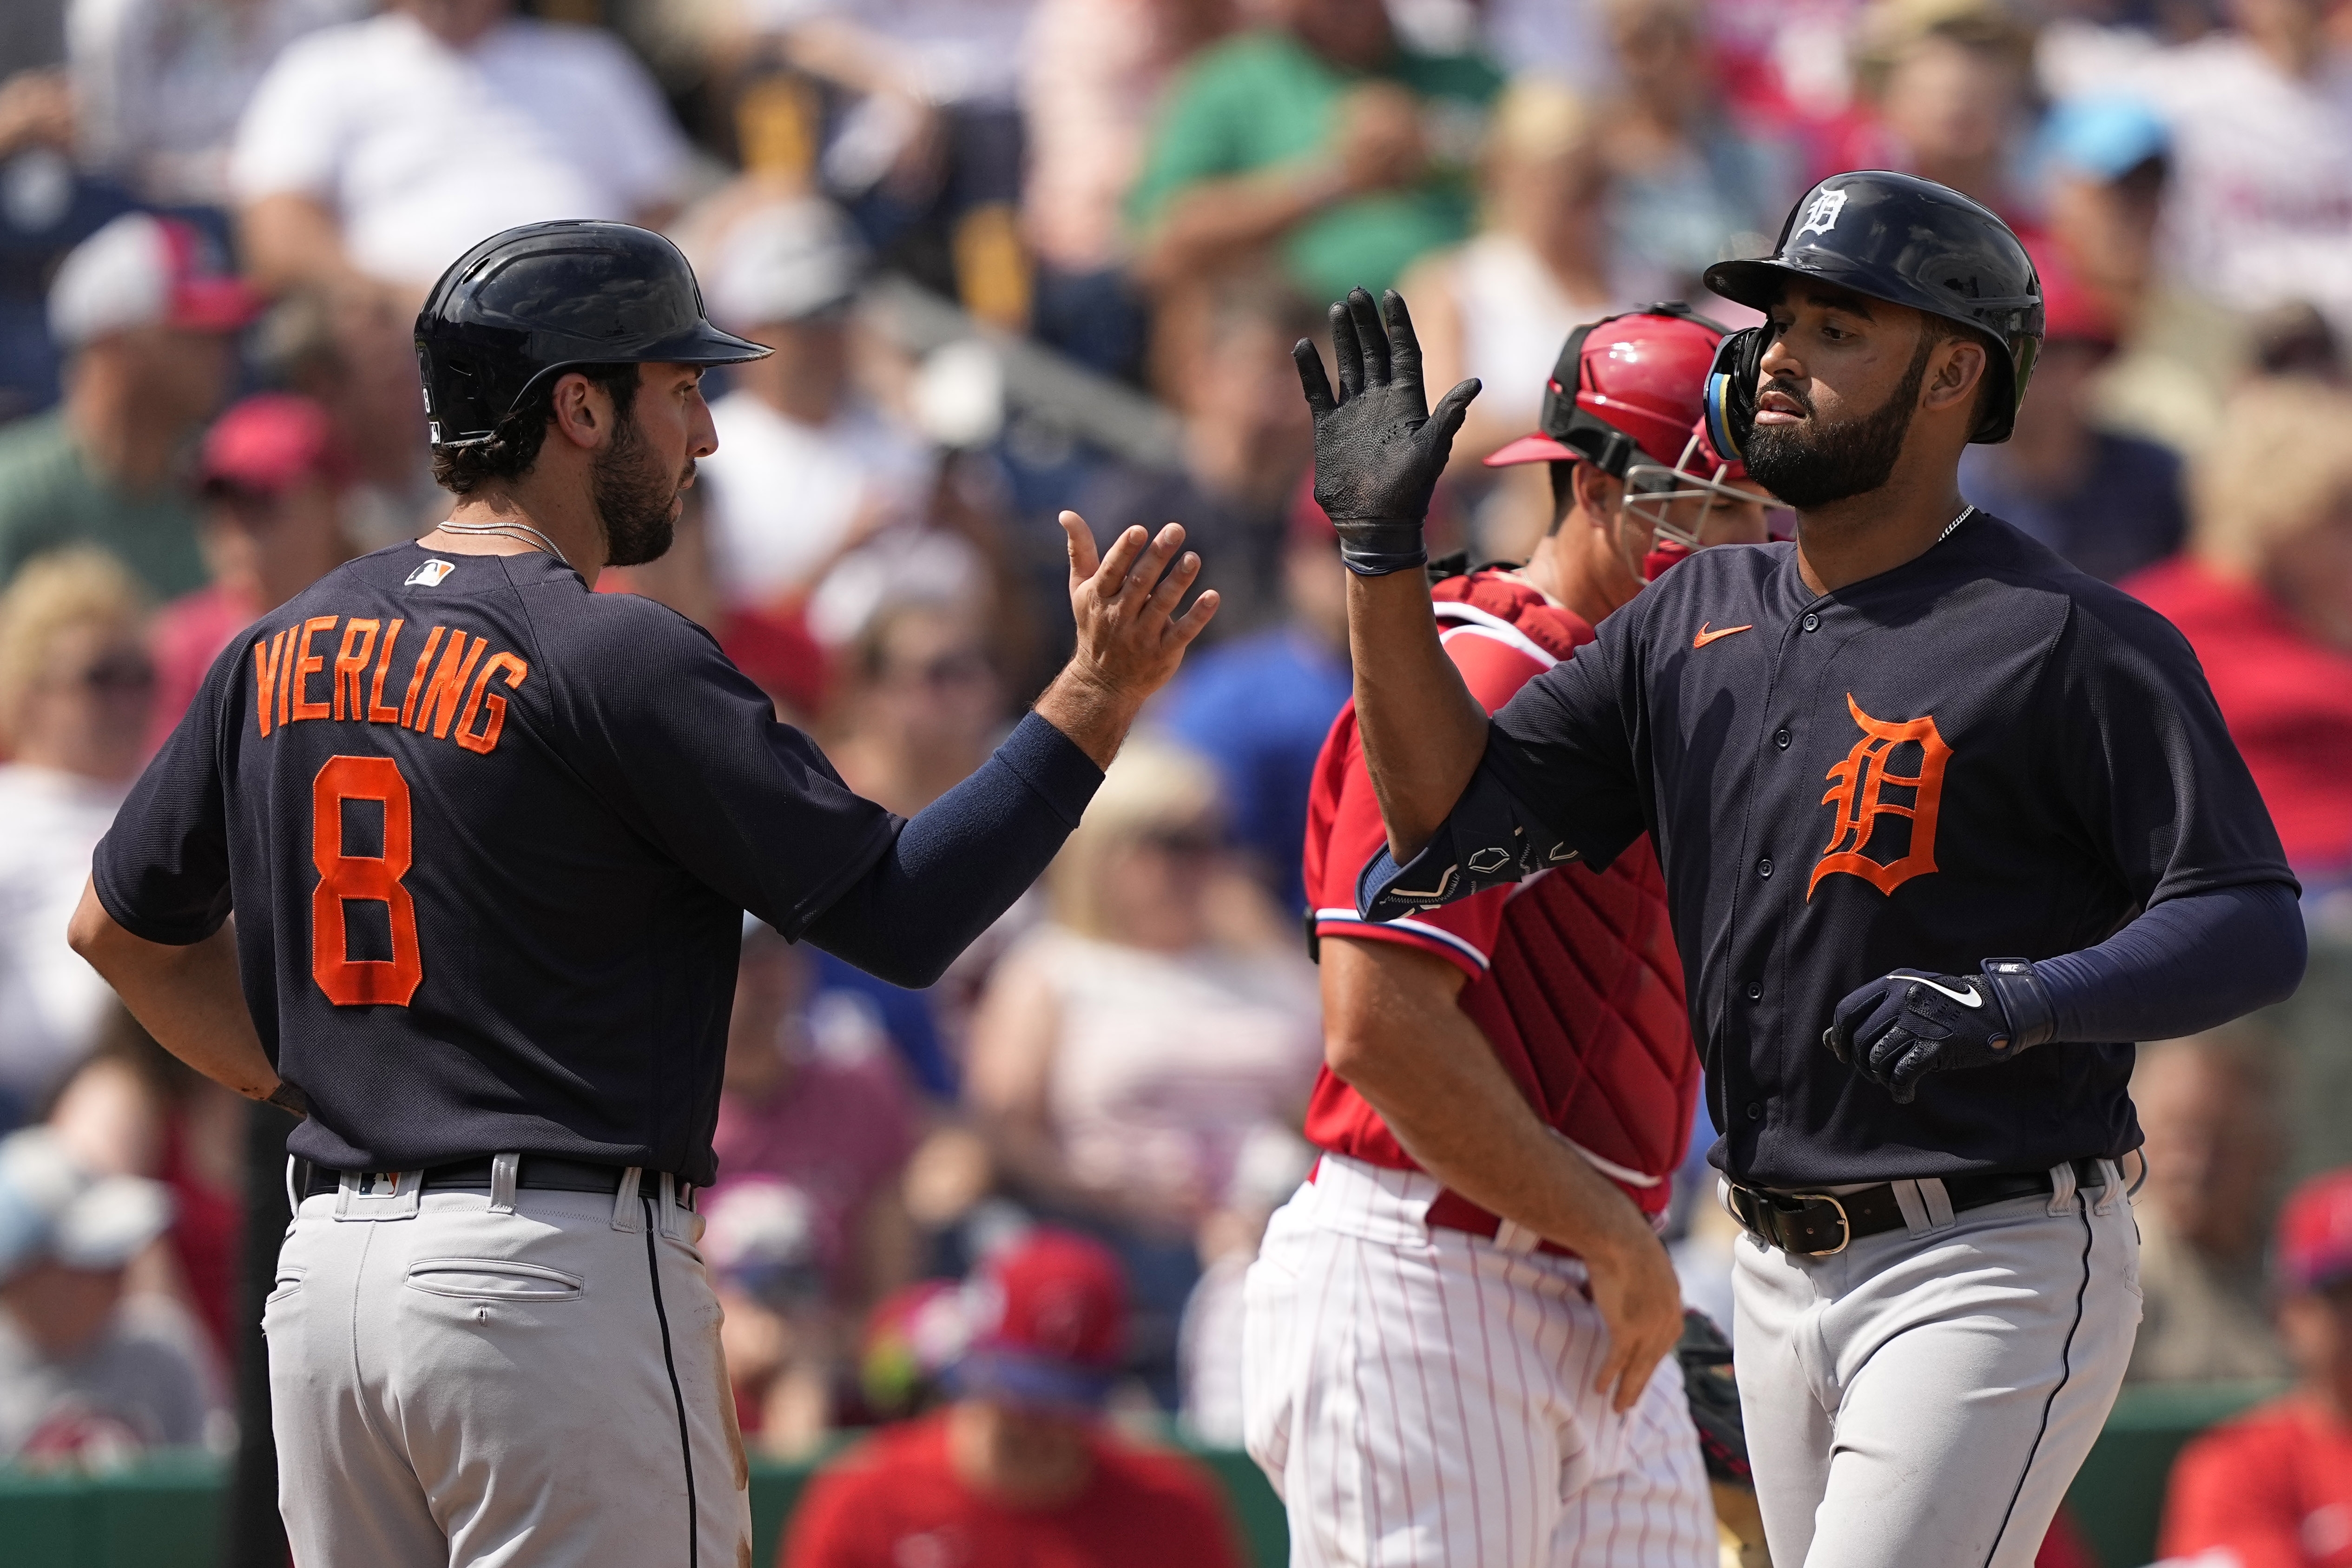 How to Watch the Detroit Tigers vs. Minnesota Twins - MLB Spring Training